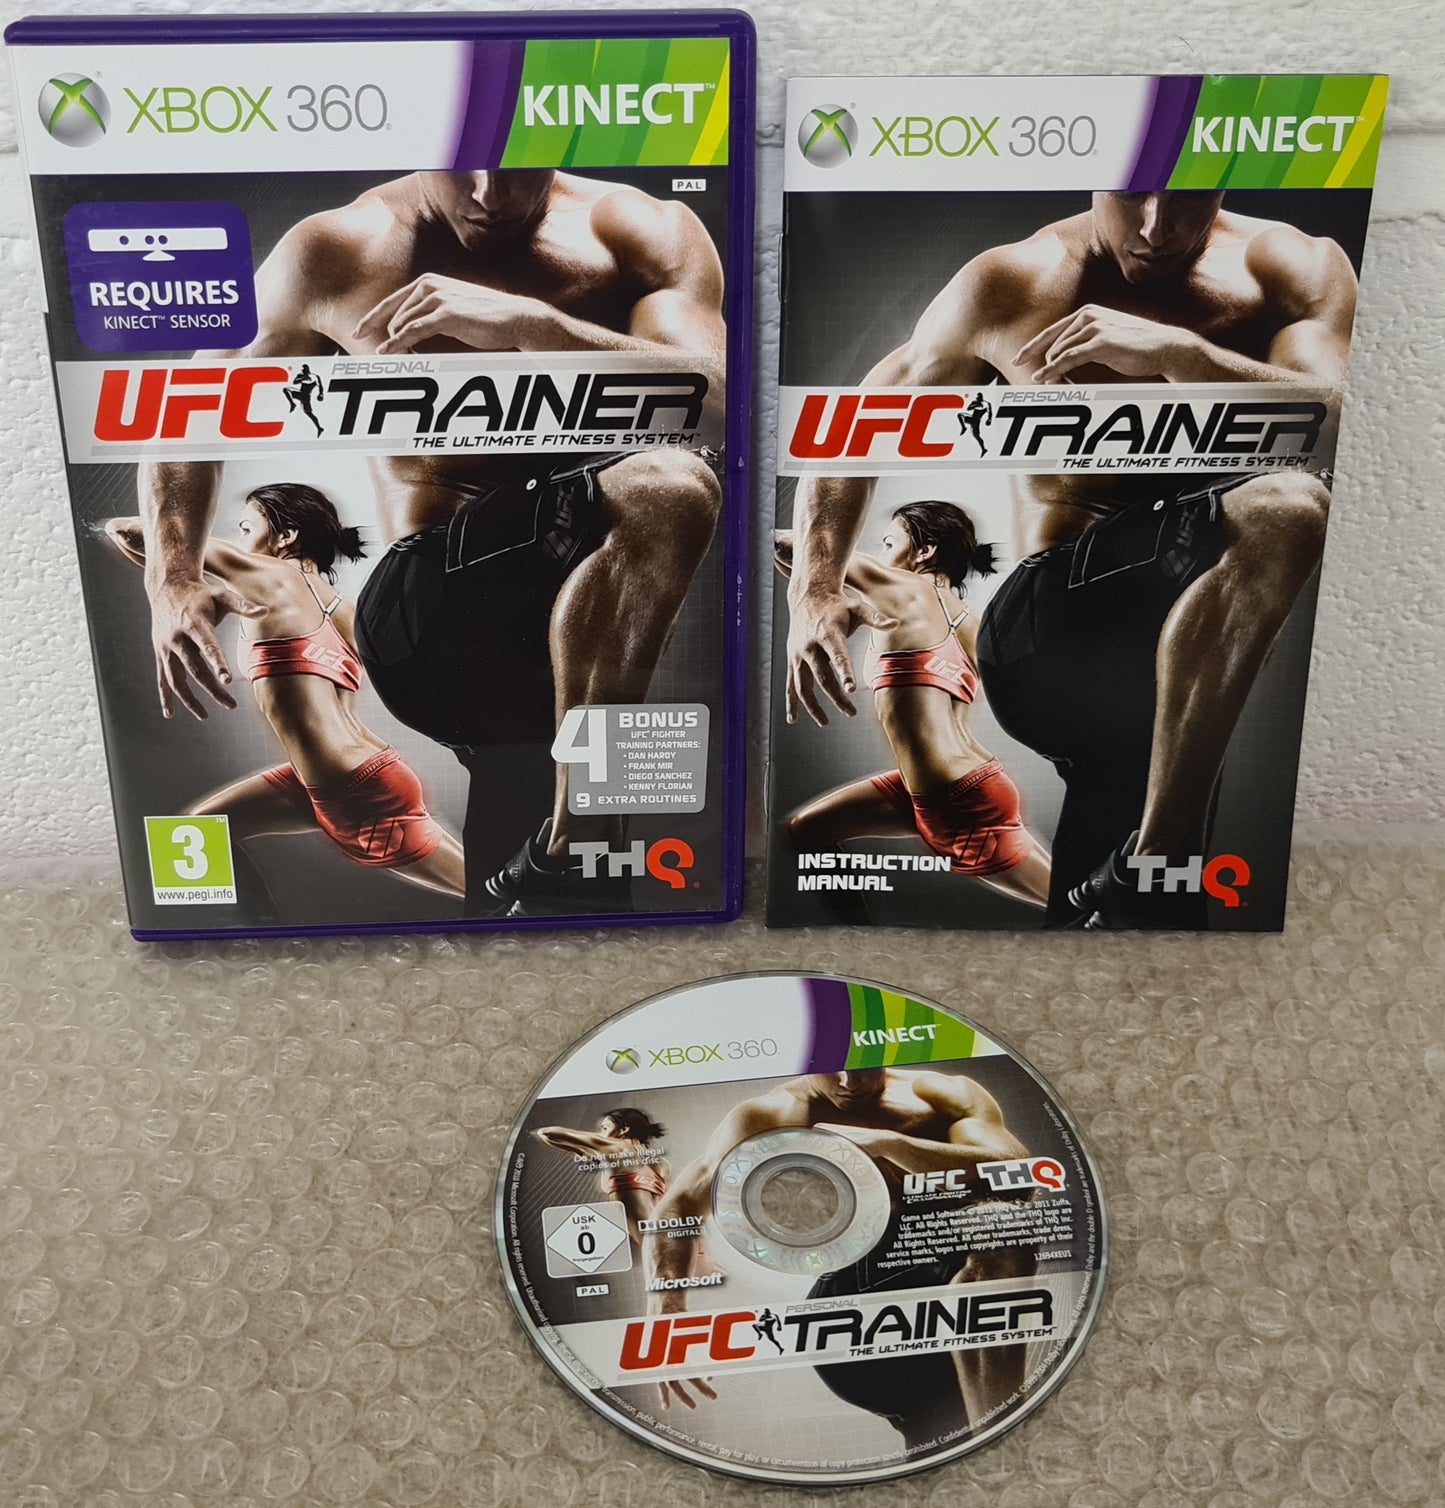 Personal UFC Trainer the Ultimate Fitness System Microsoft Xbox 360 Game